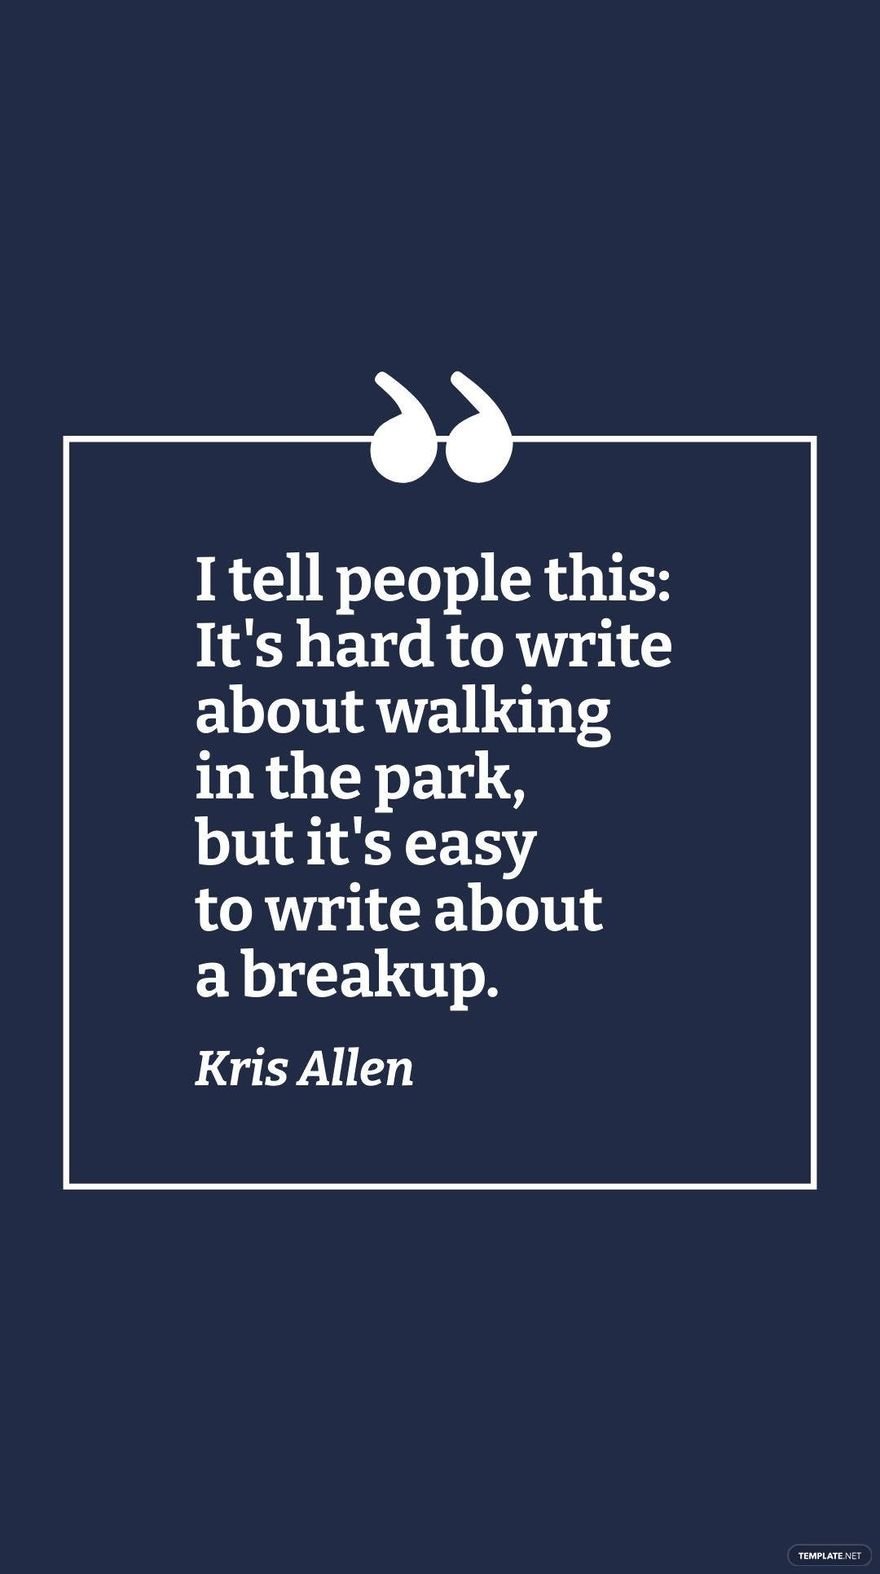 Free Kris Allen - I tell people this: It's hard to write about walking in the park, but it's easy to write about a breakup. in JPG